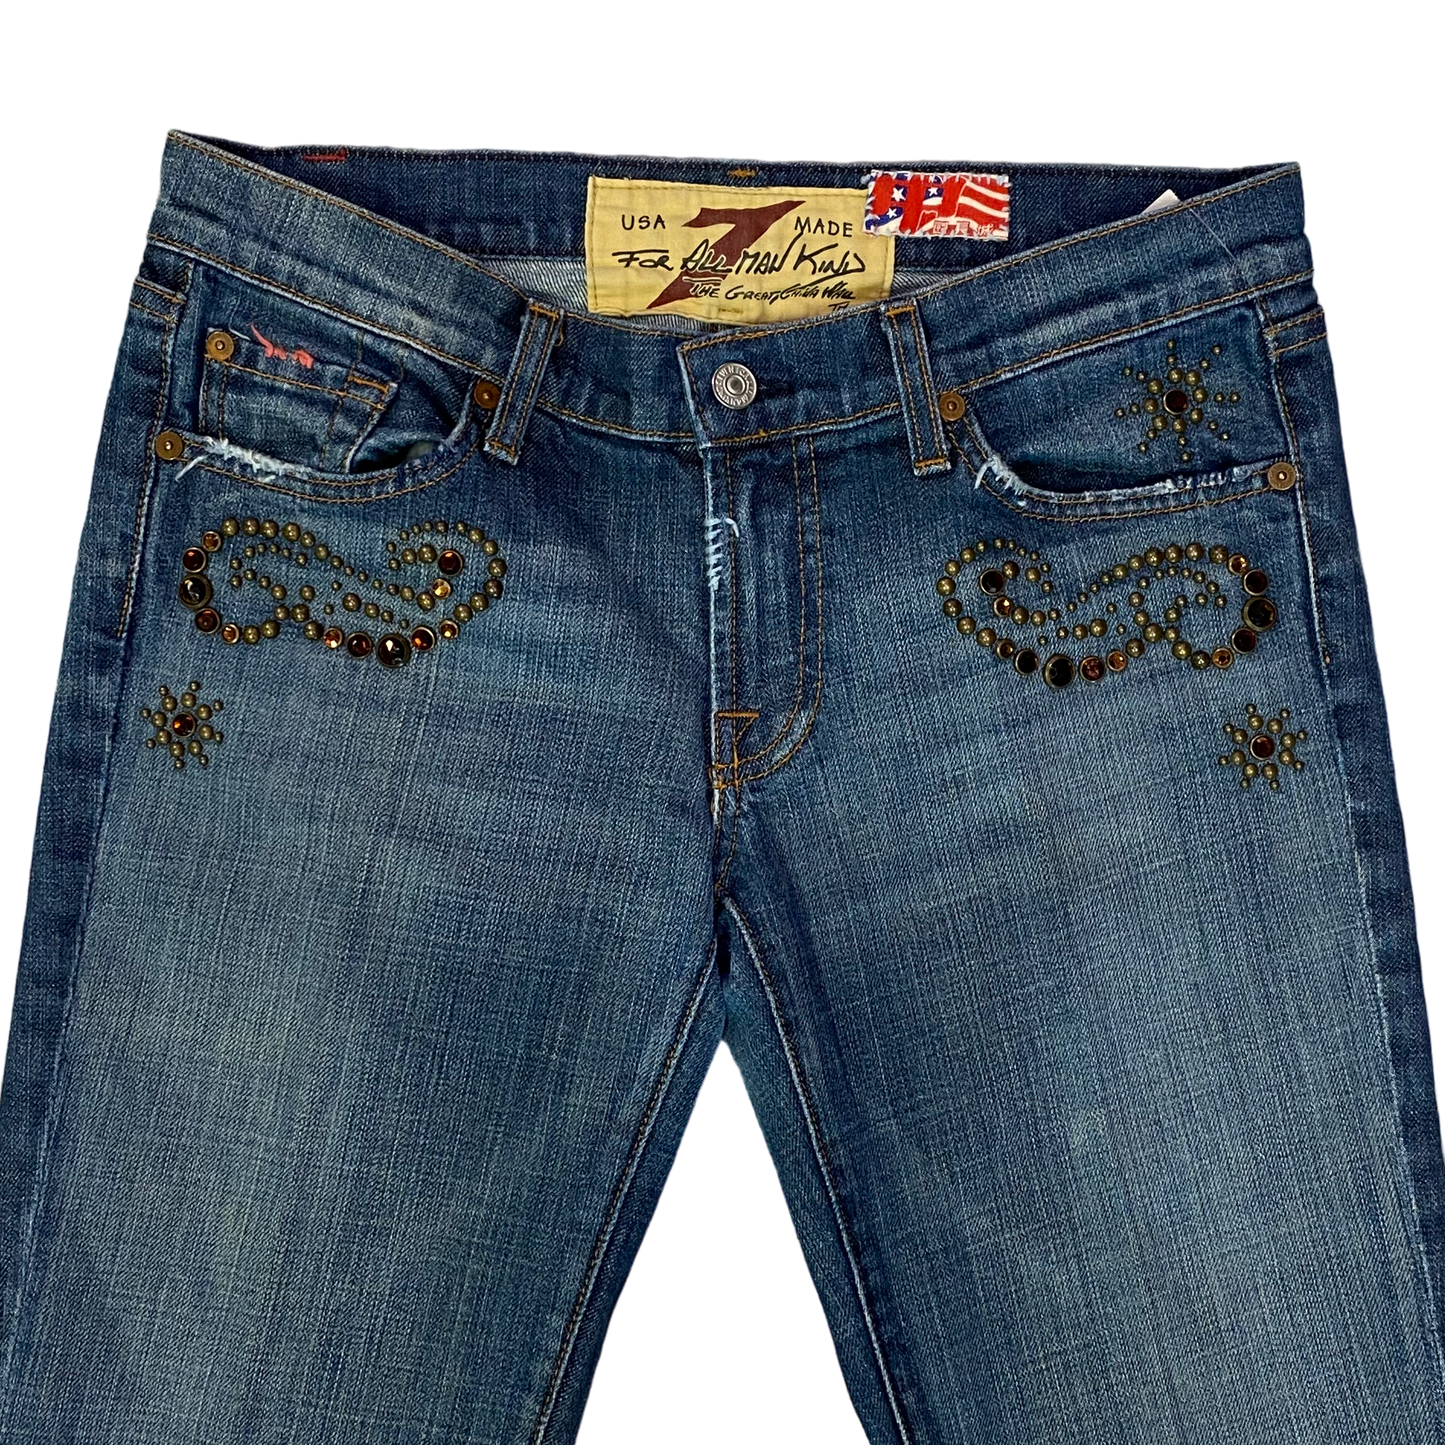 Jeans Designer By 7 For All Mankind  Size: 29